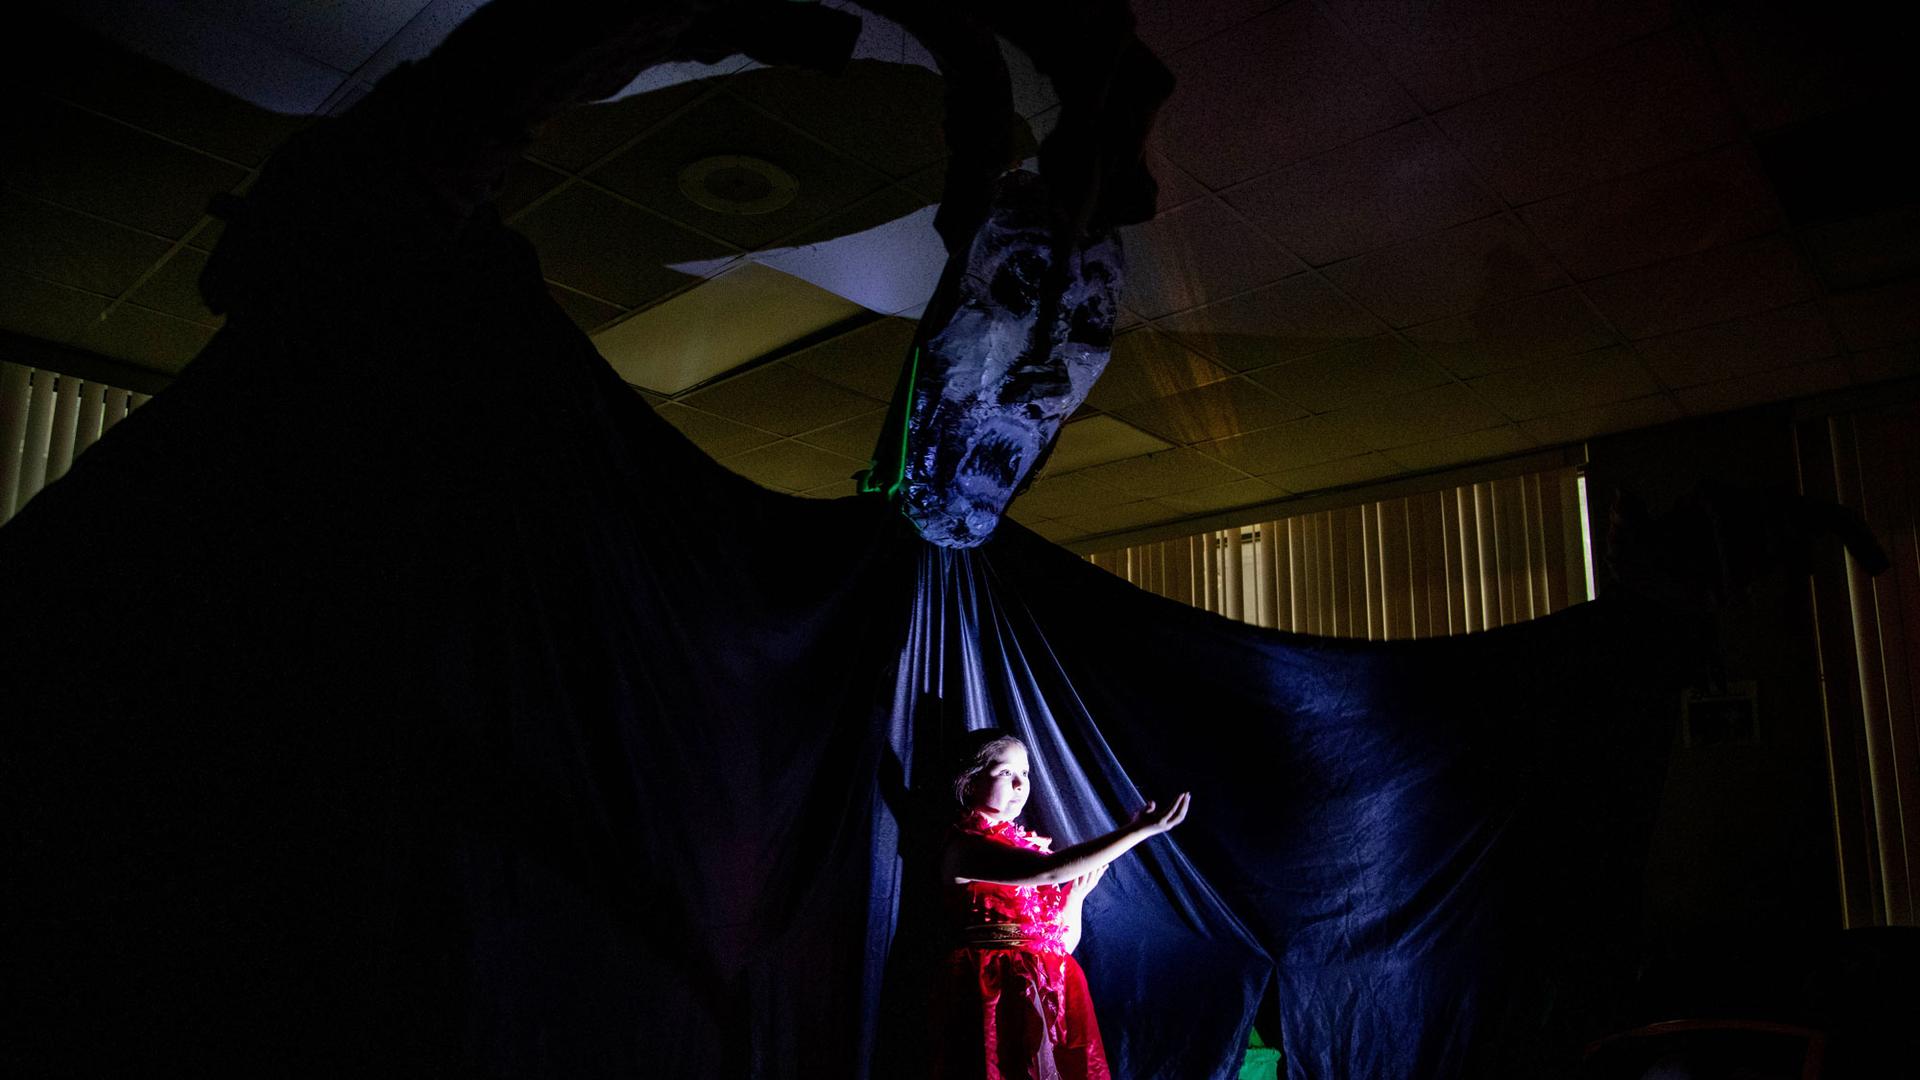 A young girl is lit up on a stage with an enormous dark monster behind her. 